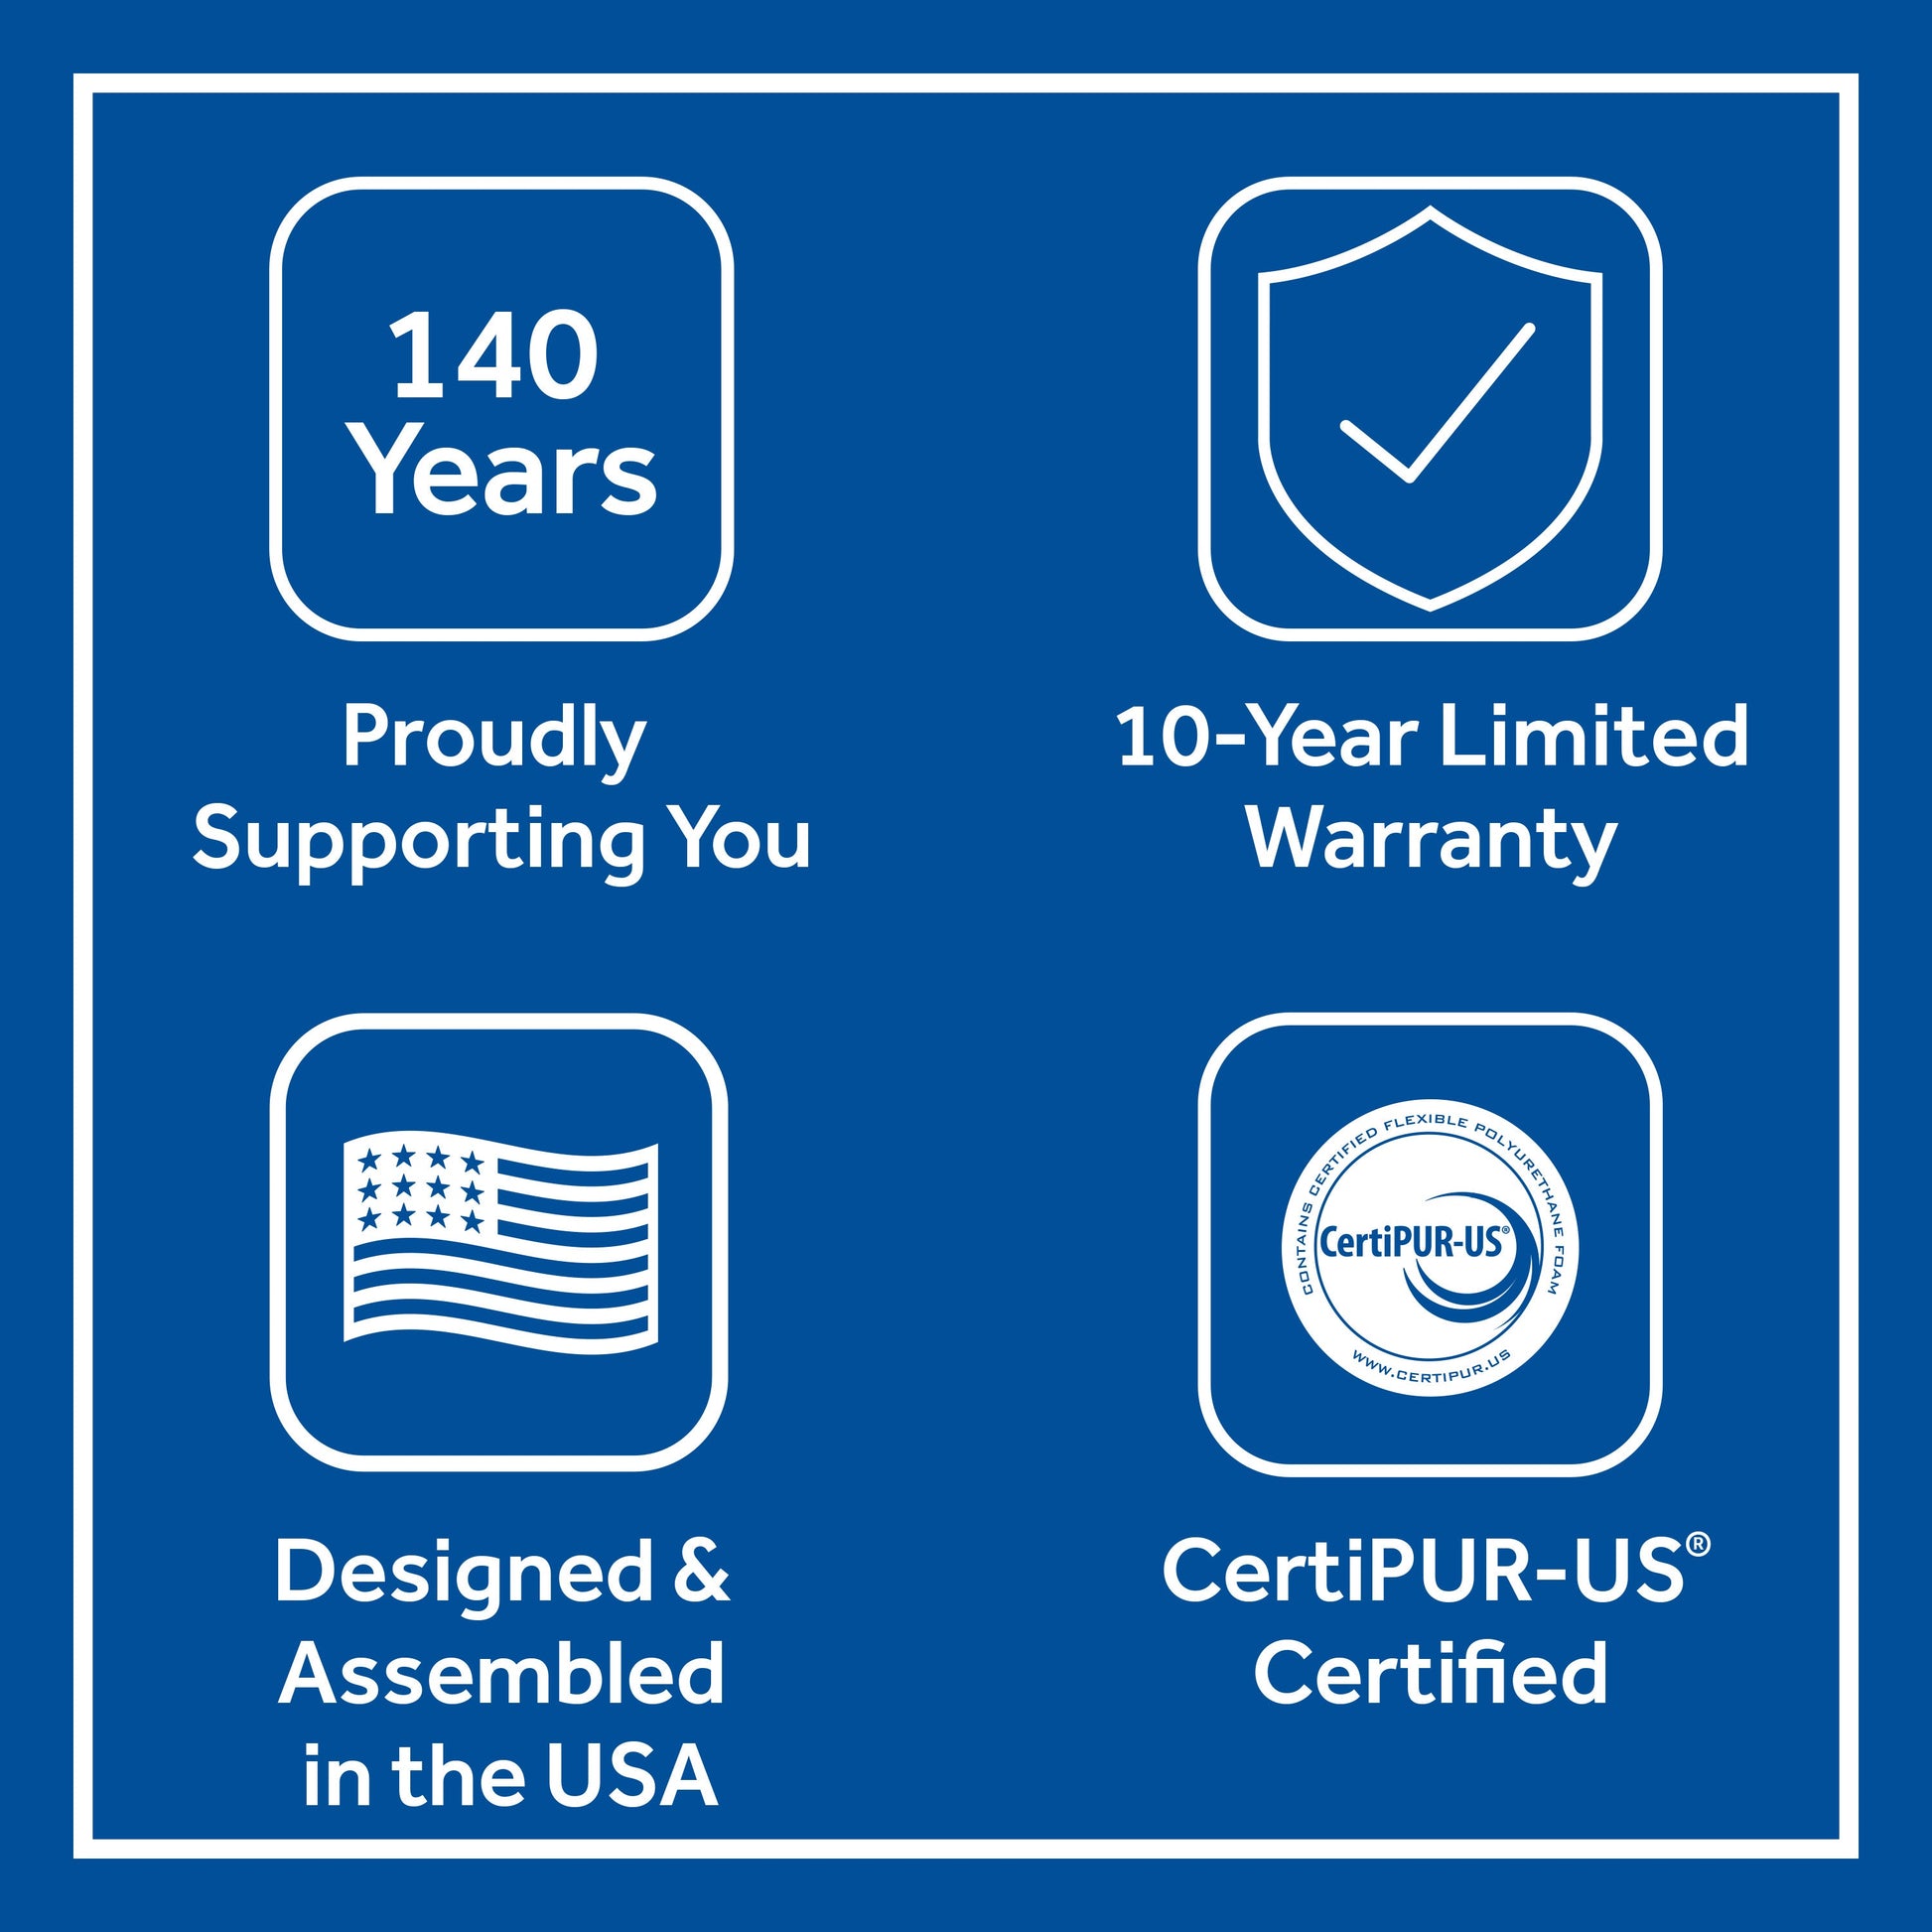 Sealy Brenham Firm Mattress Features; Proudly supporting you, 10 year limited warranty, designed and assembled in the USA, CertiPUR-US Certified